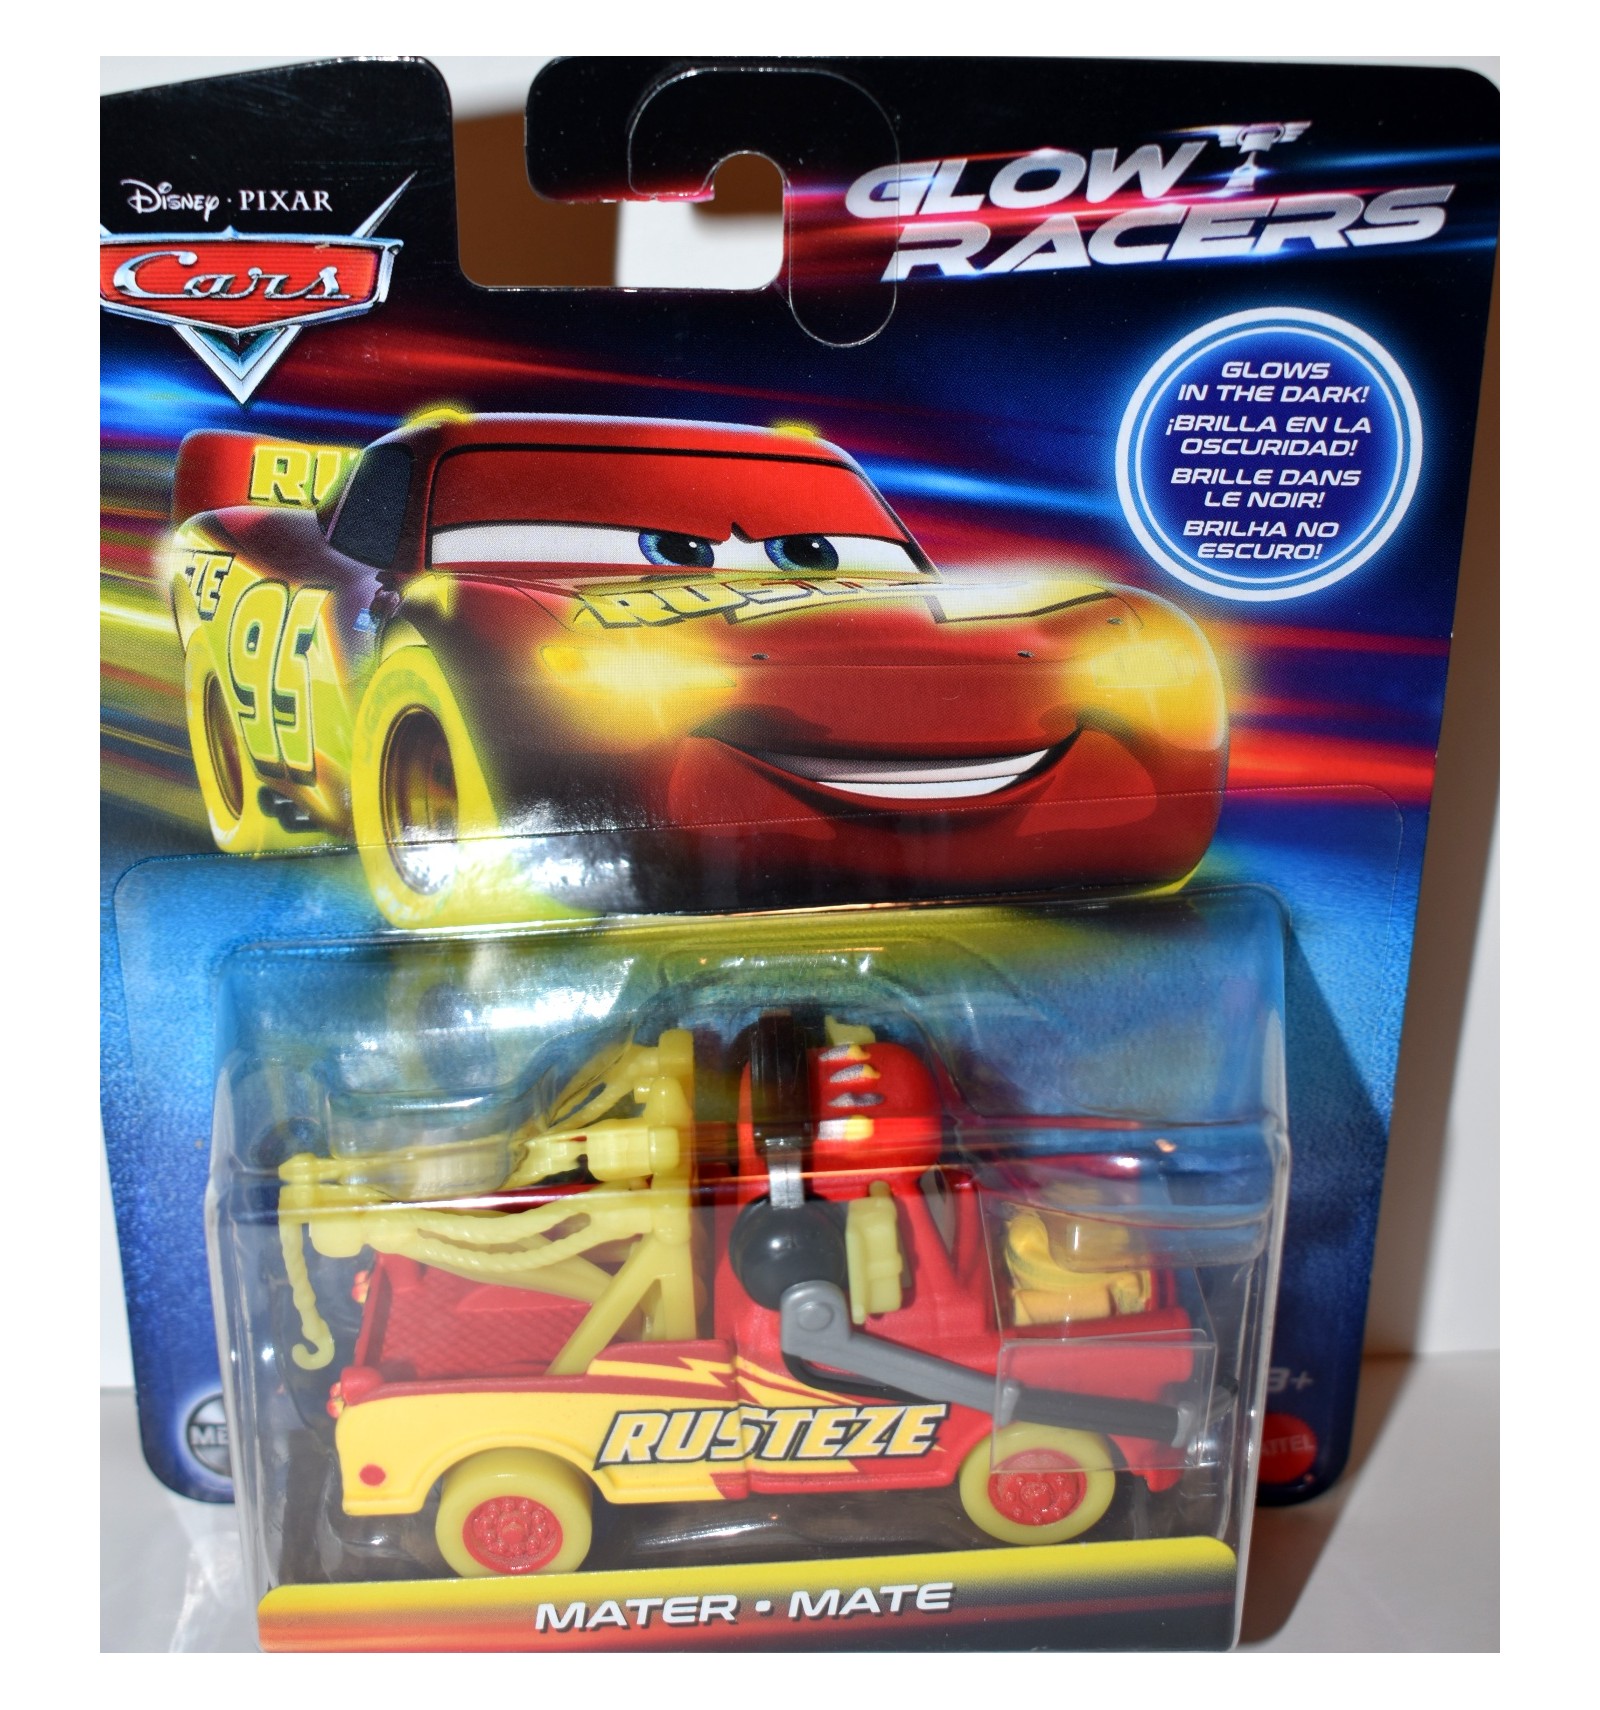 https://globaldiecastdirect.com/66529-thickbox_default/disney-cars-glow-racers-mater-the-tow-truck.jpg